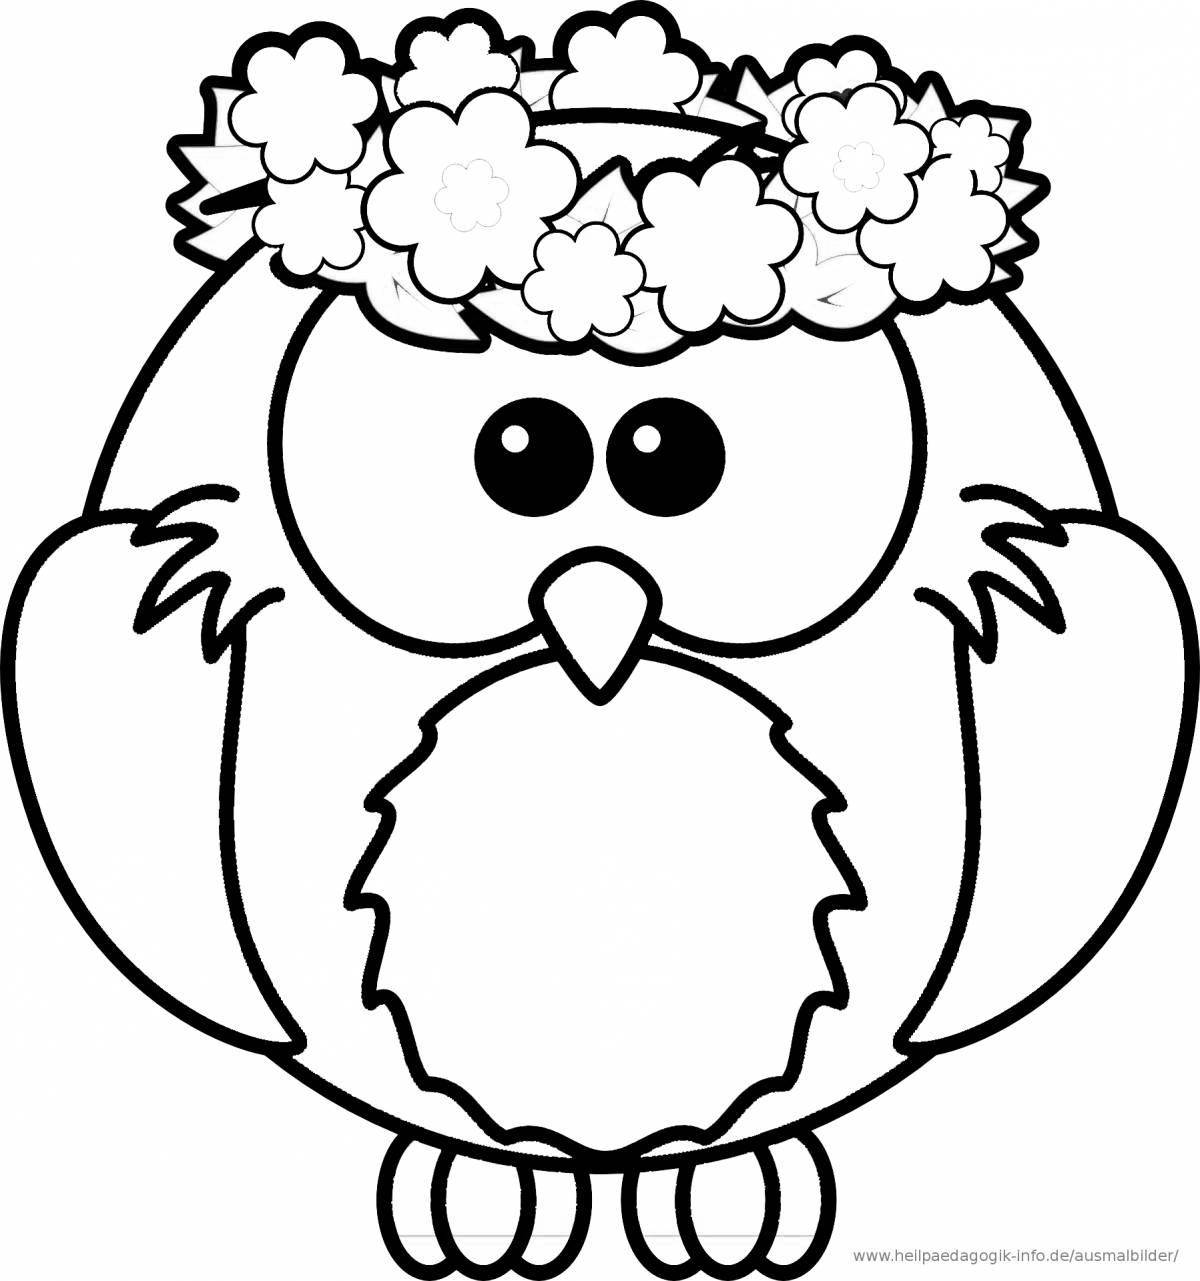 Great baby owlet coloring page